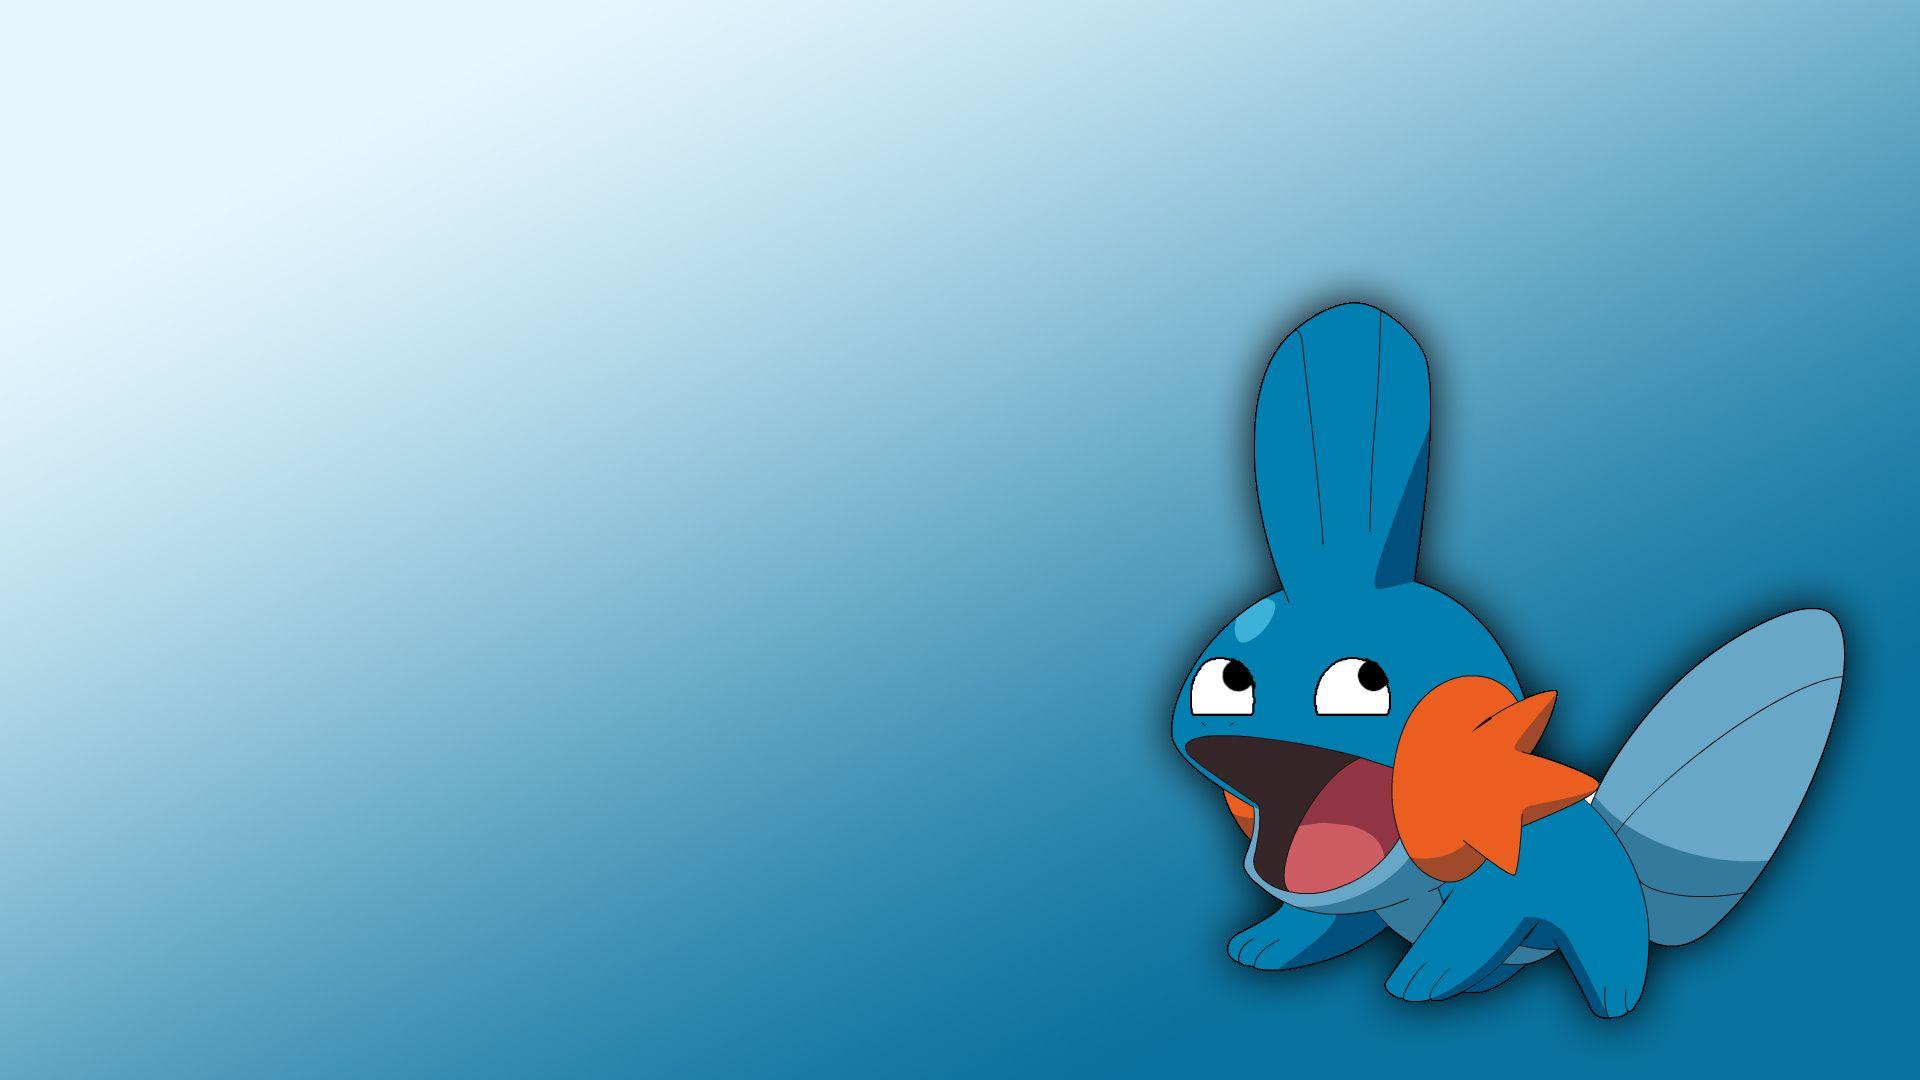 Mudkip Backgrounds Group.